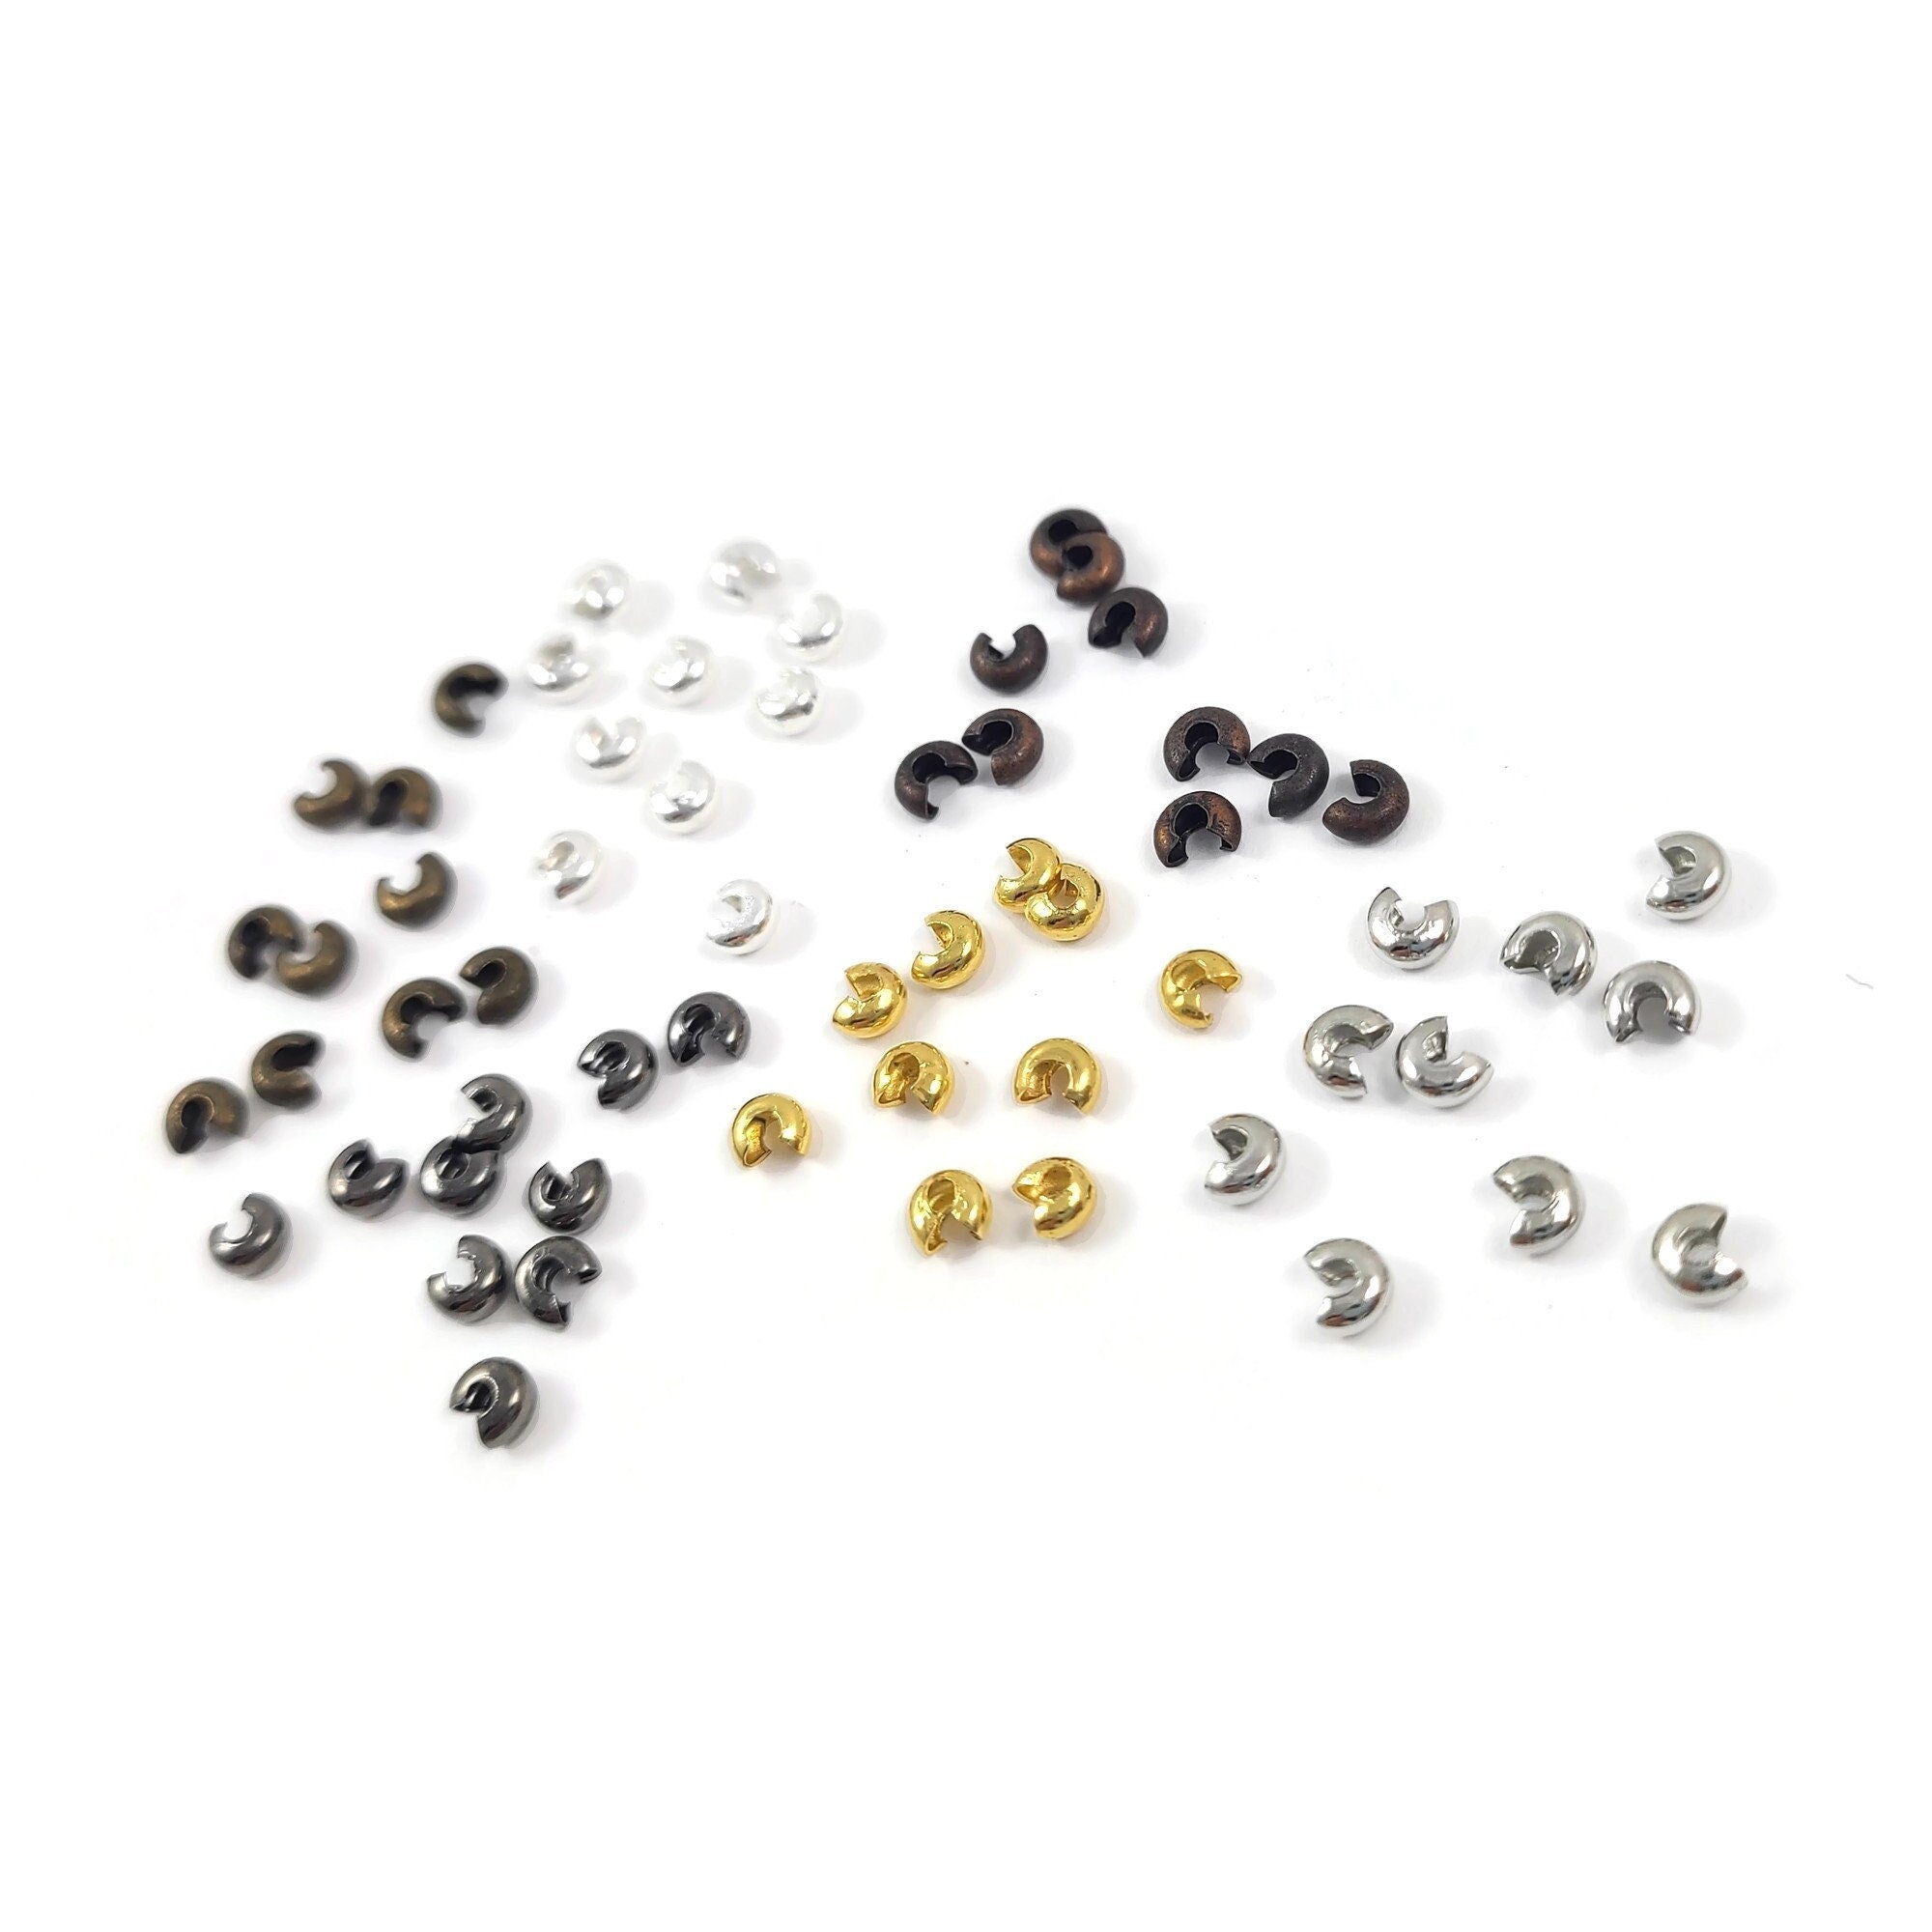 Crimp cover bead kit - Nickel, lead, and cadmium free - Hypoallergenic jewelry making findings - Cord ends